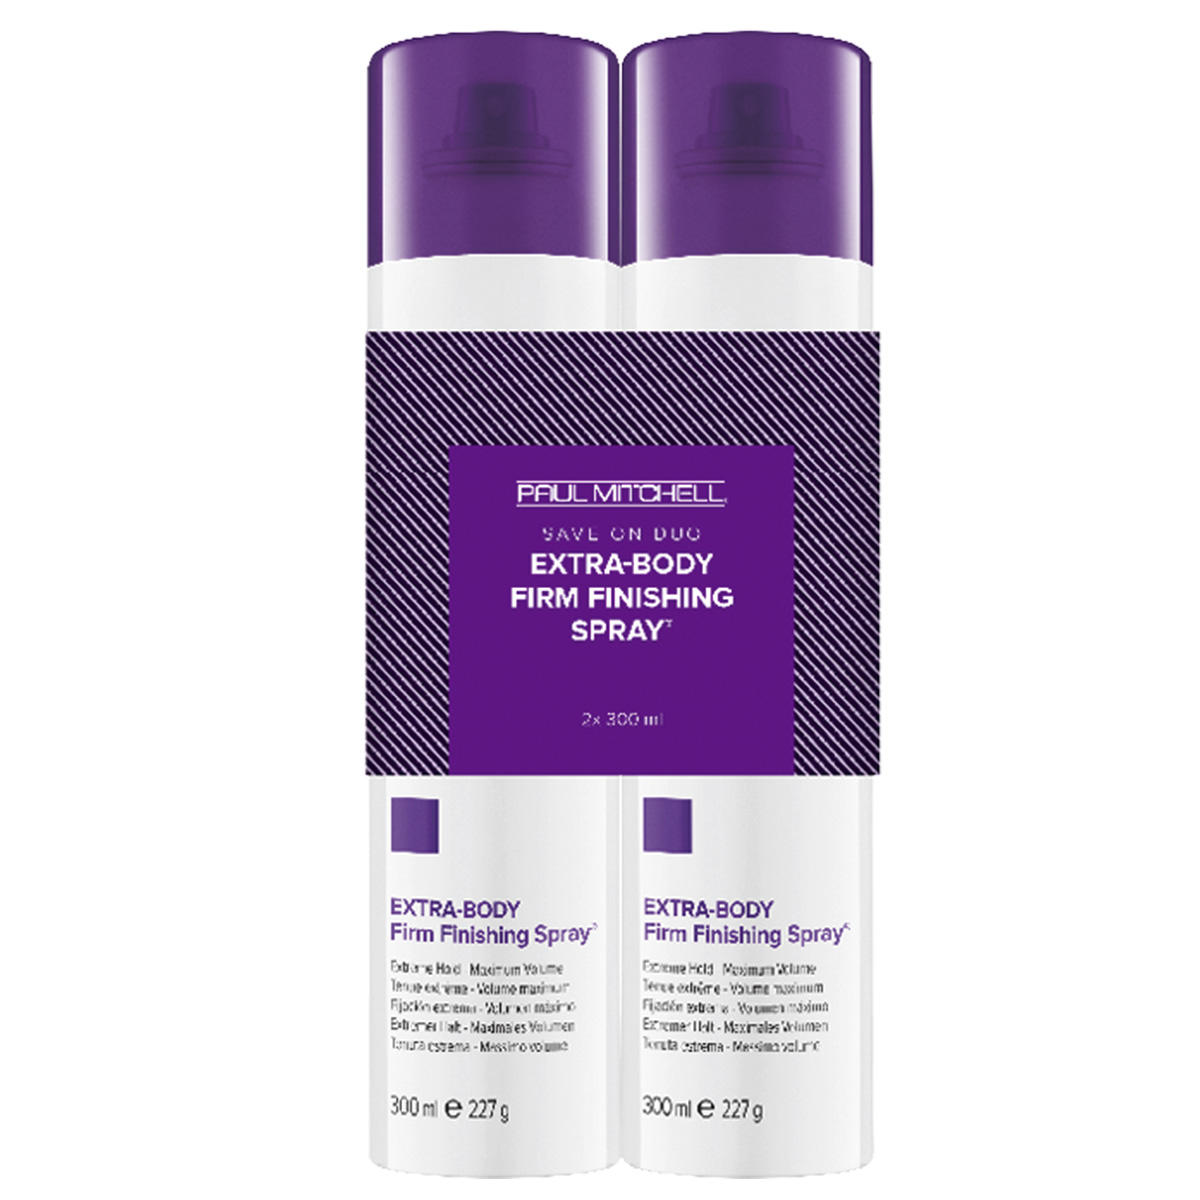 Paul Mitchell Extra-Body SAVE ON DUO Firm Finishing Spray 2 x 300 ml - 1